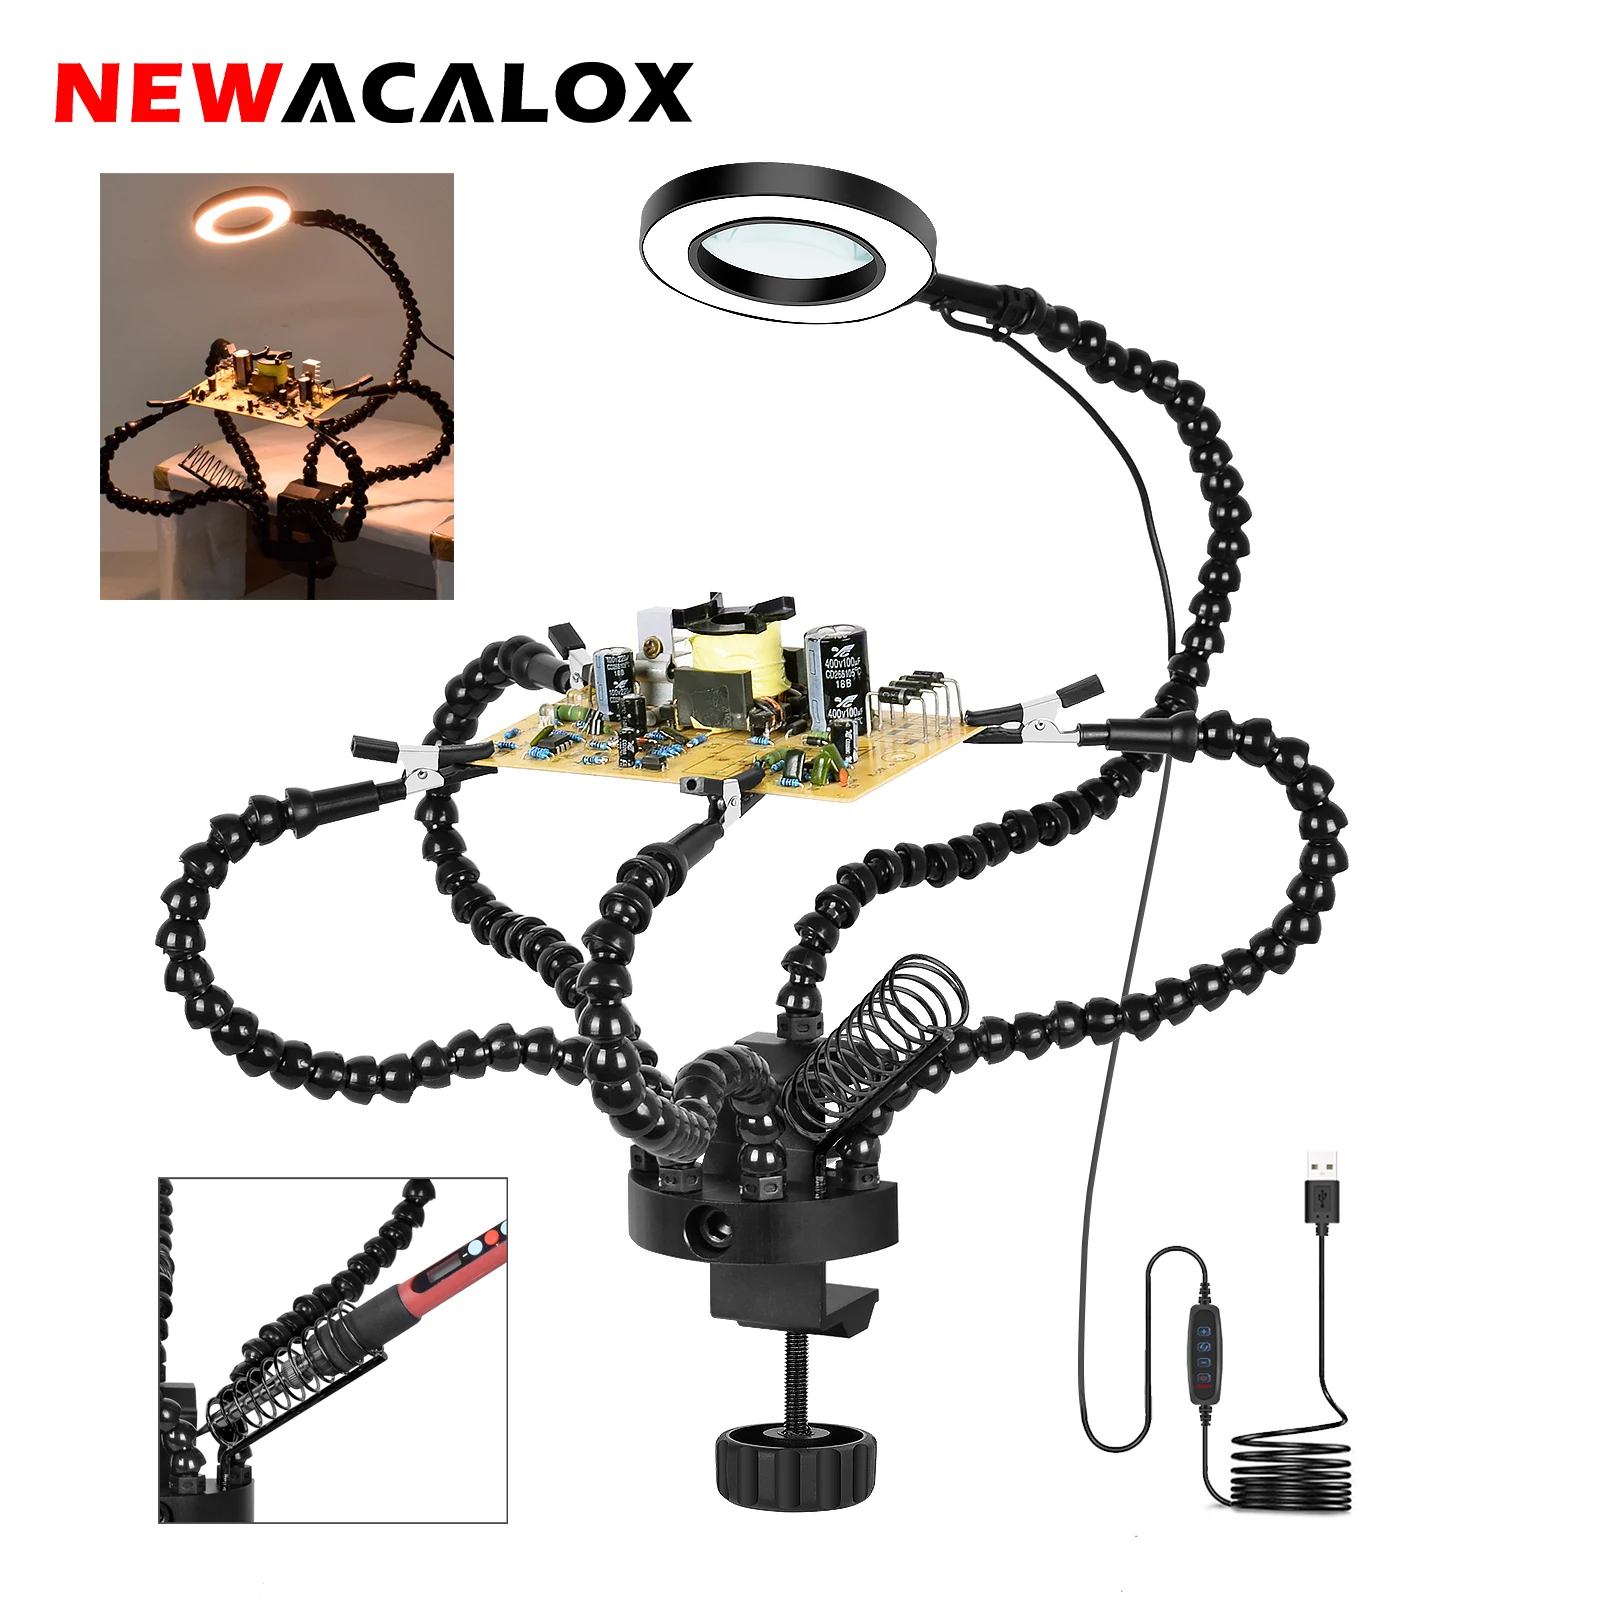 

NEWACALOX Soldering Third Hand Tool with 3X LED Magnifying Glass Desk Clamp Flexible Arm Helping Hands PCB Holder Welding Repair